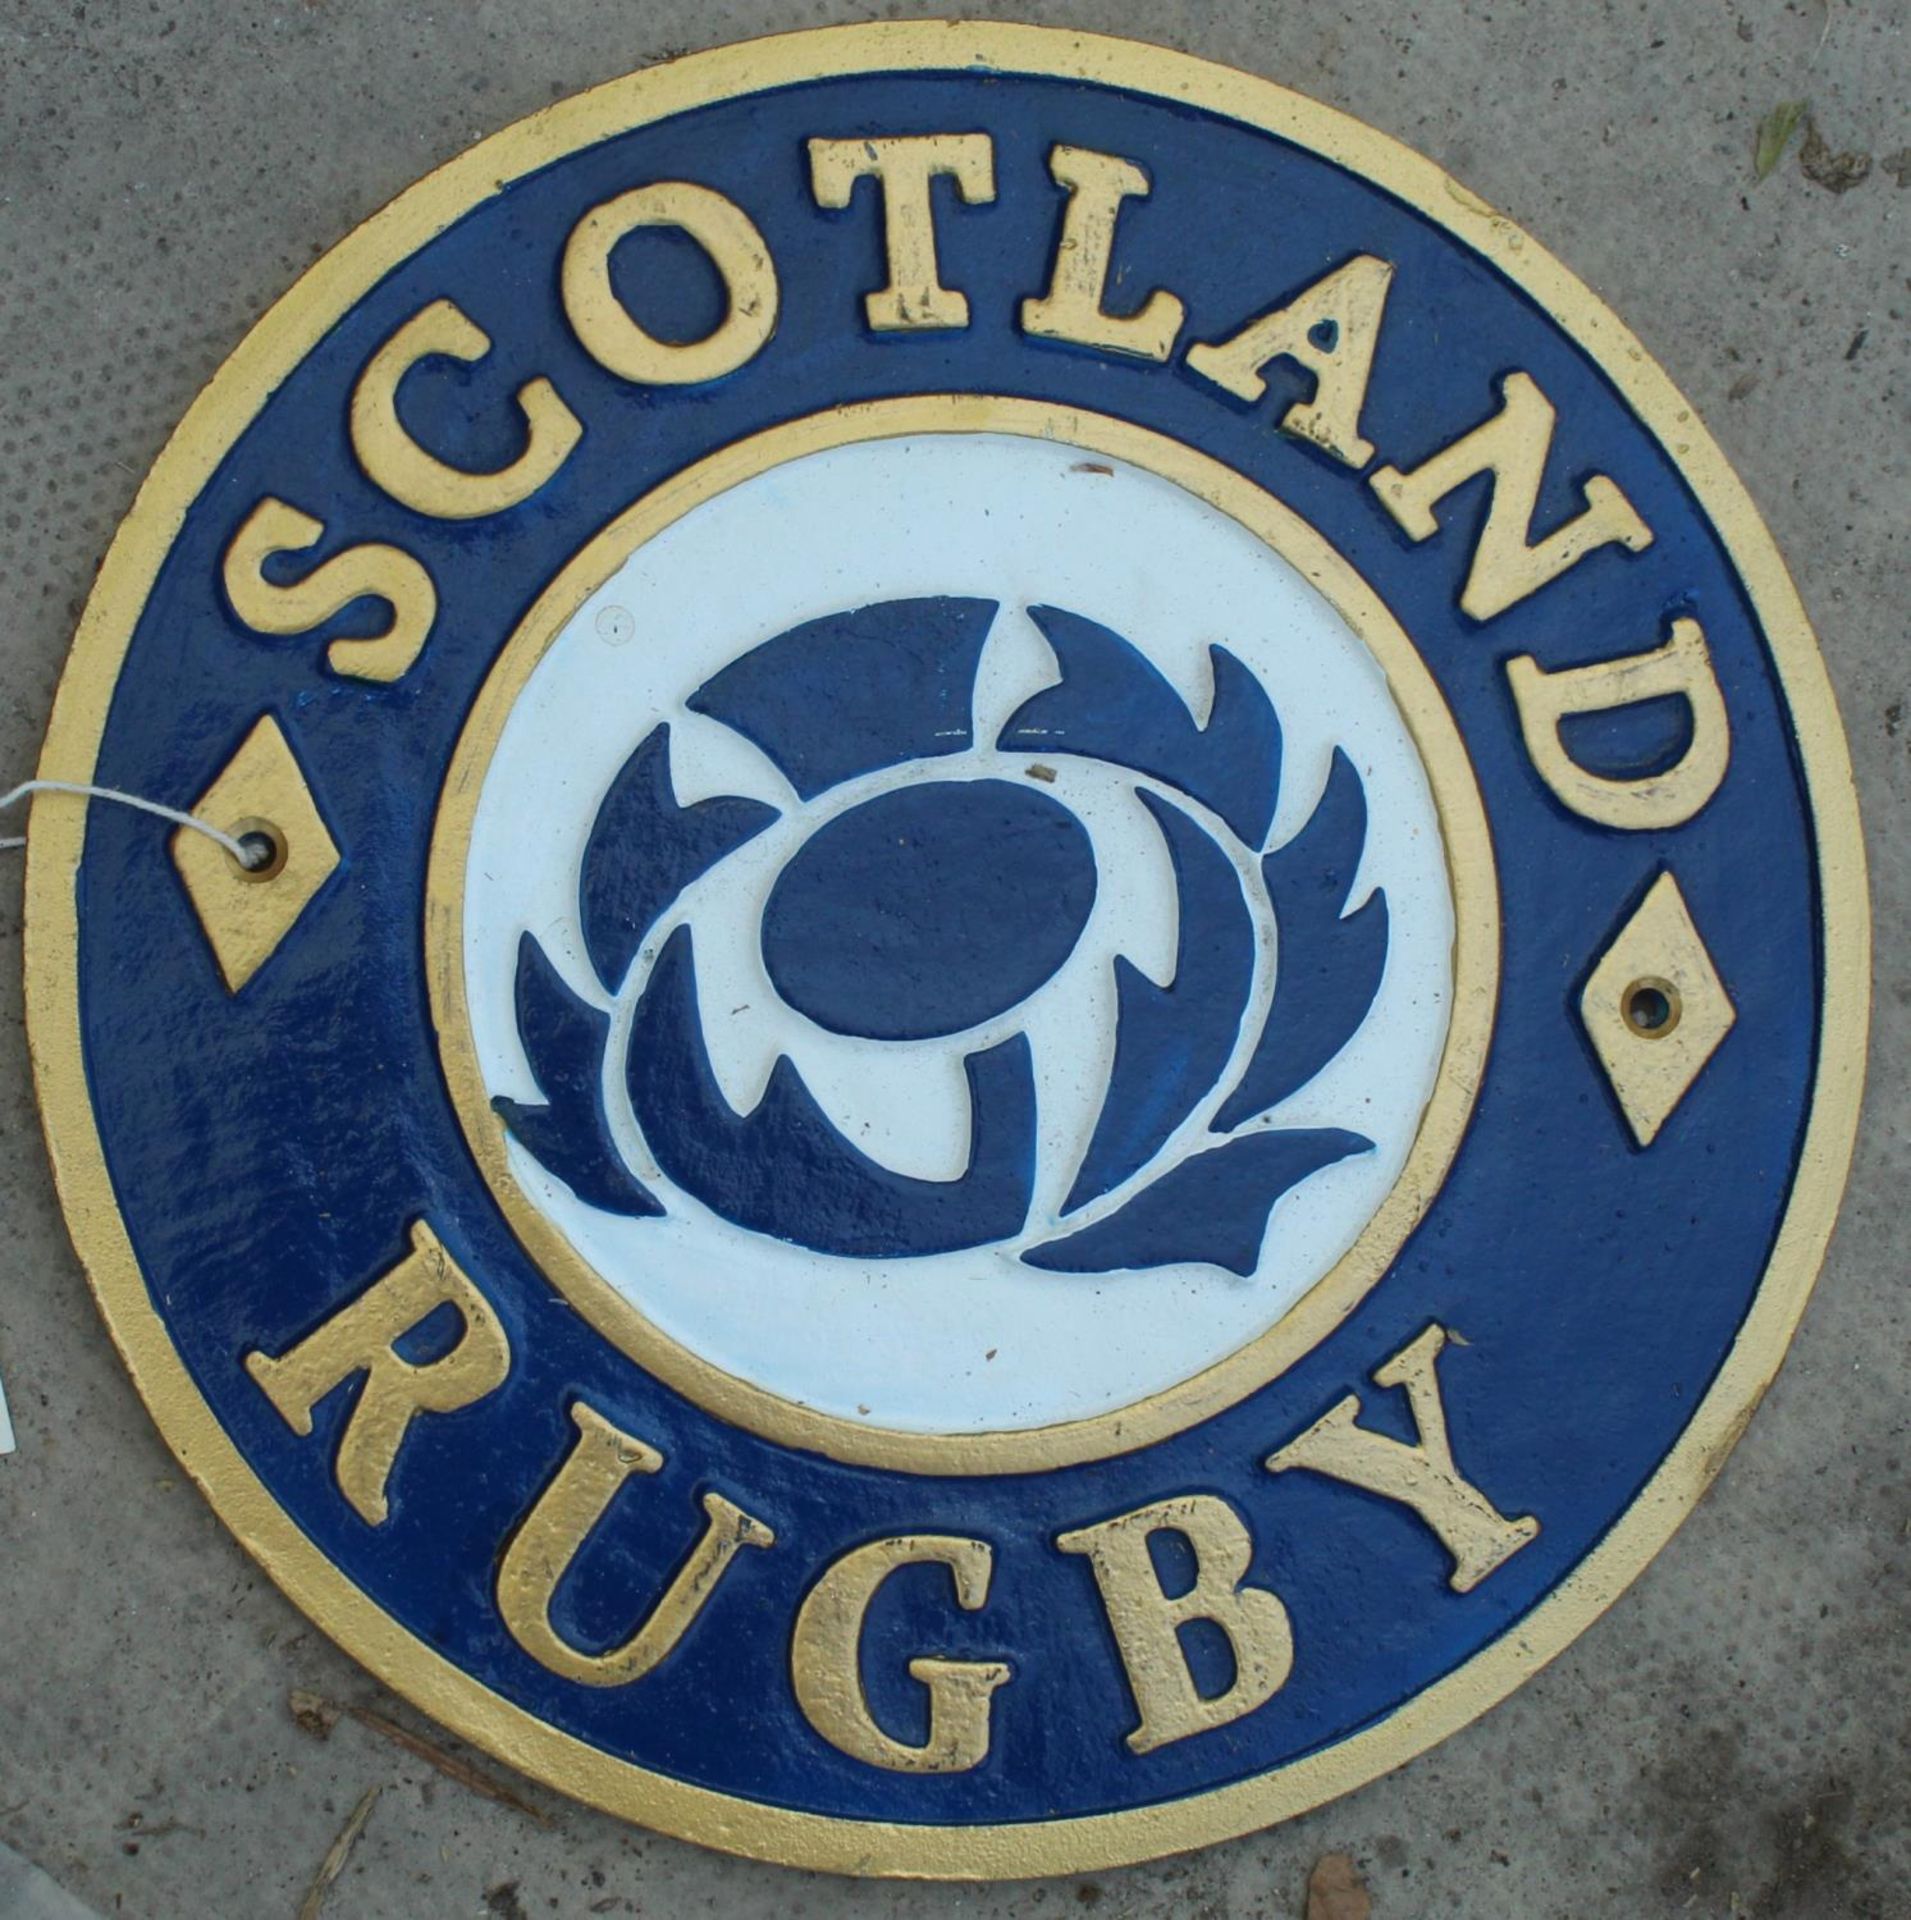 CAST IRON SCOTLAND RUGBY SIGN NO VAT - Image 2 of 2